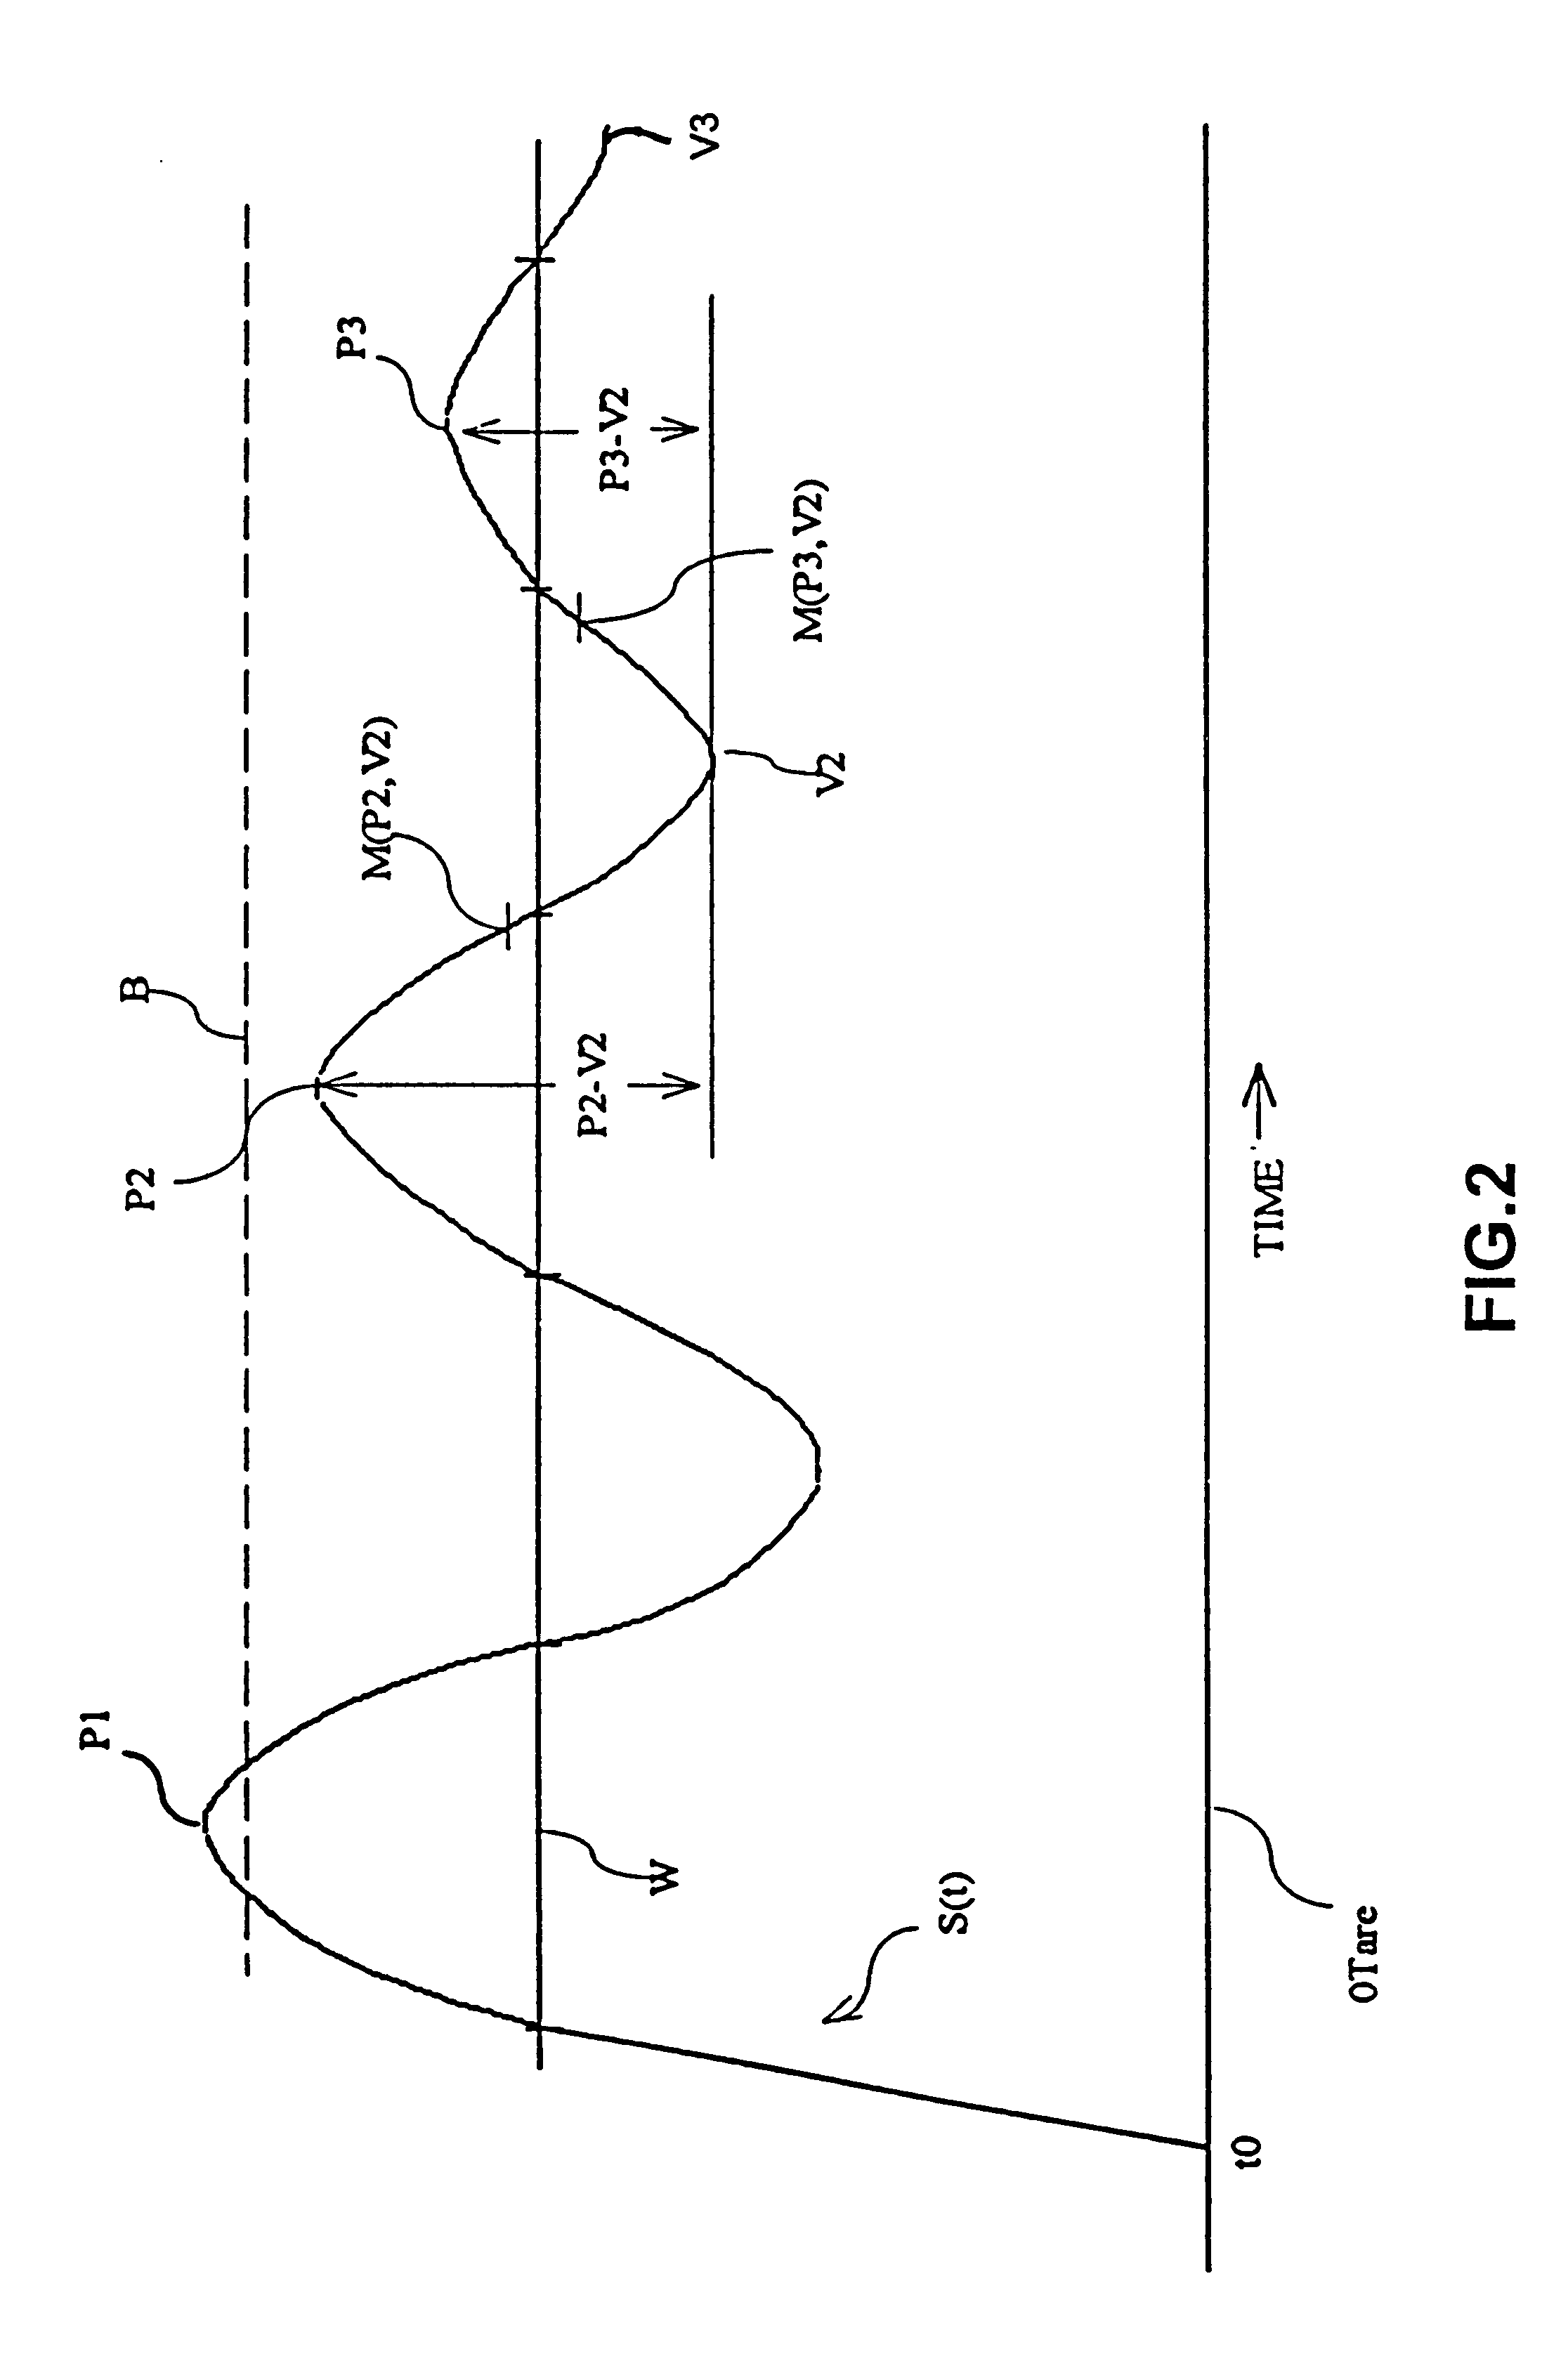 System and method for weighing items such as mailpieces in the presence of external vibration